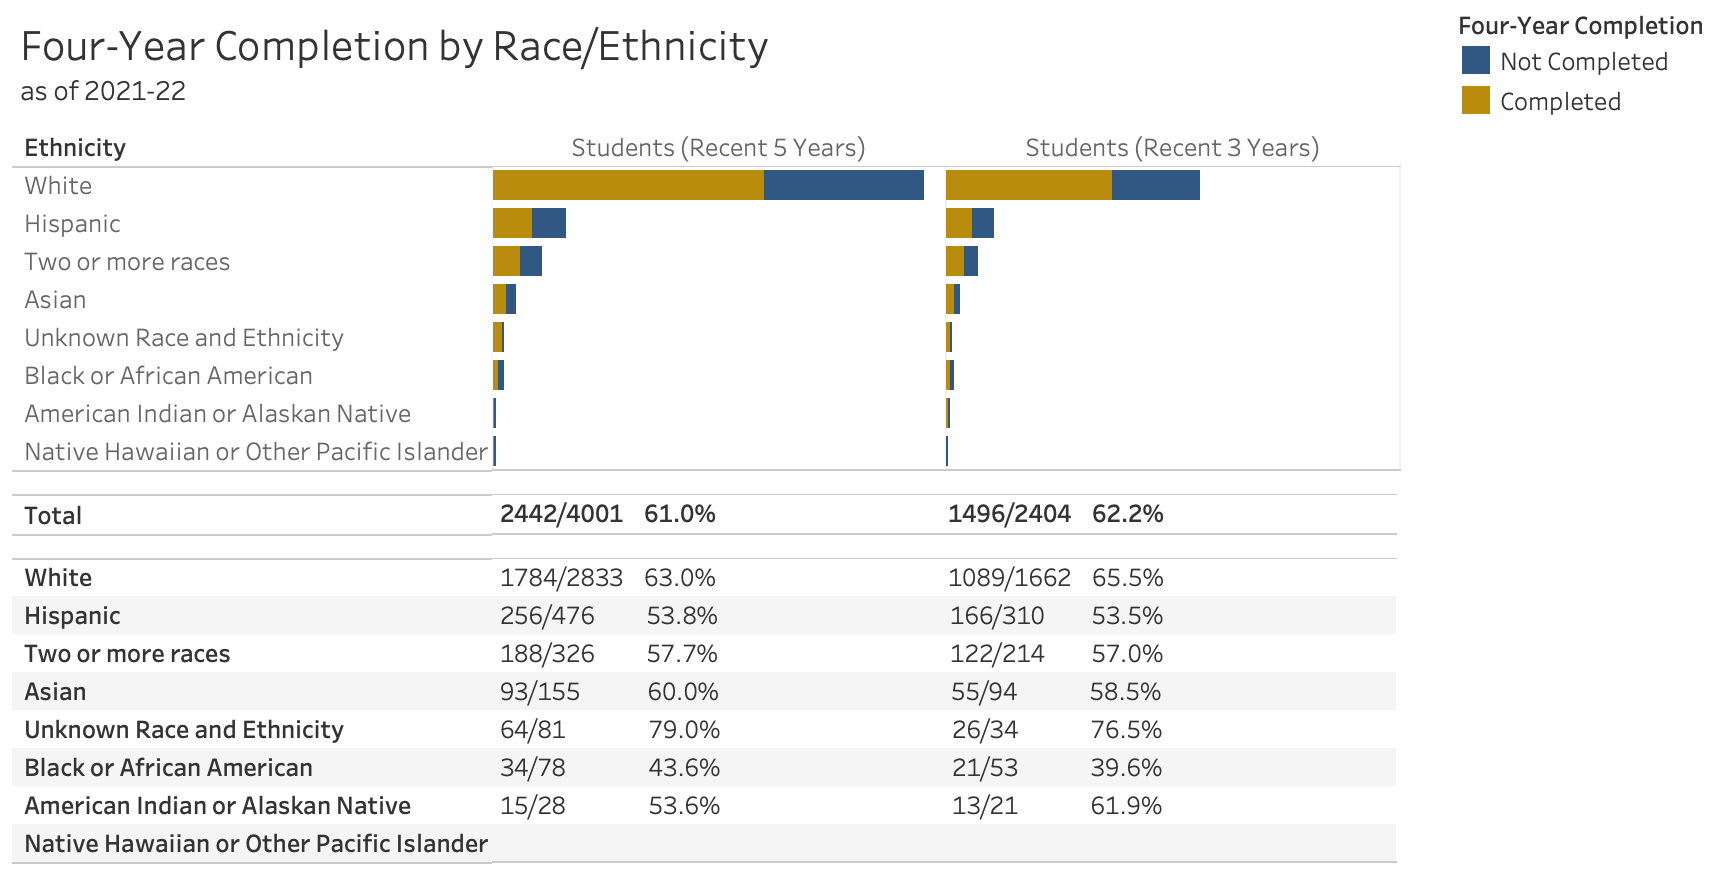 4-year completion rate by race/ethnicity